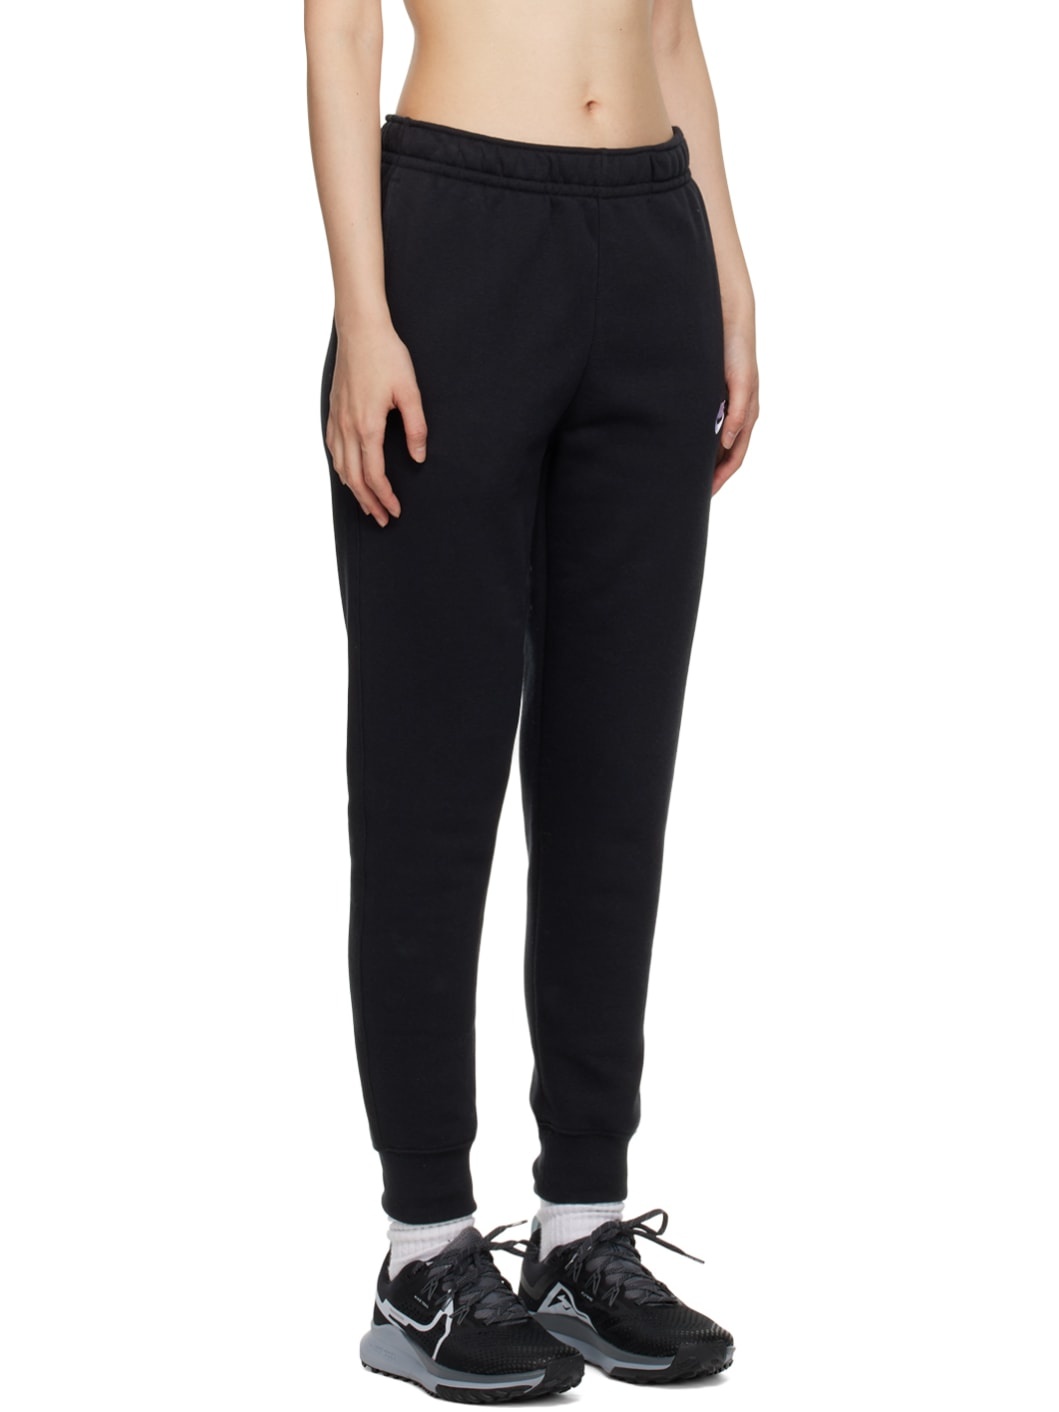 Black Embroidered Lounge Pants - 2